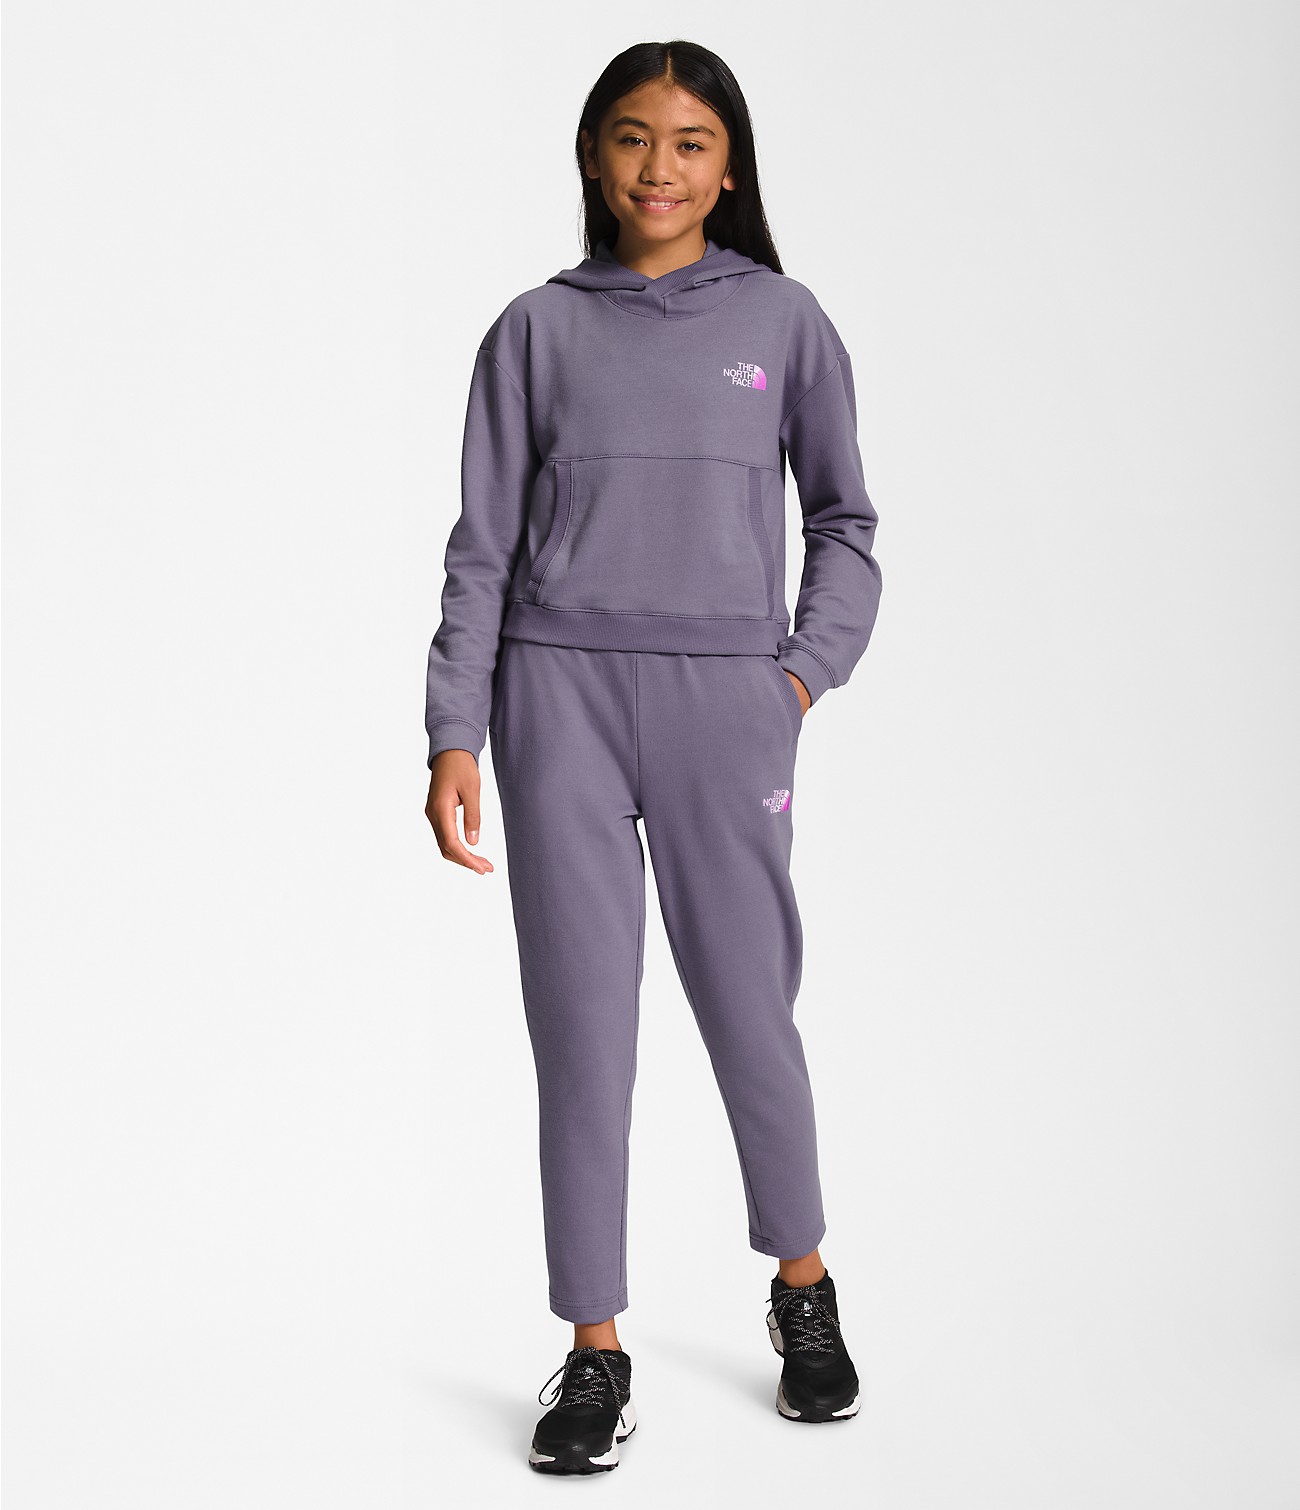 Girls’ French Terry Hoodie | The North Face